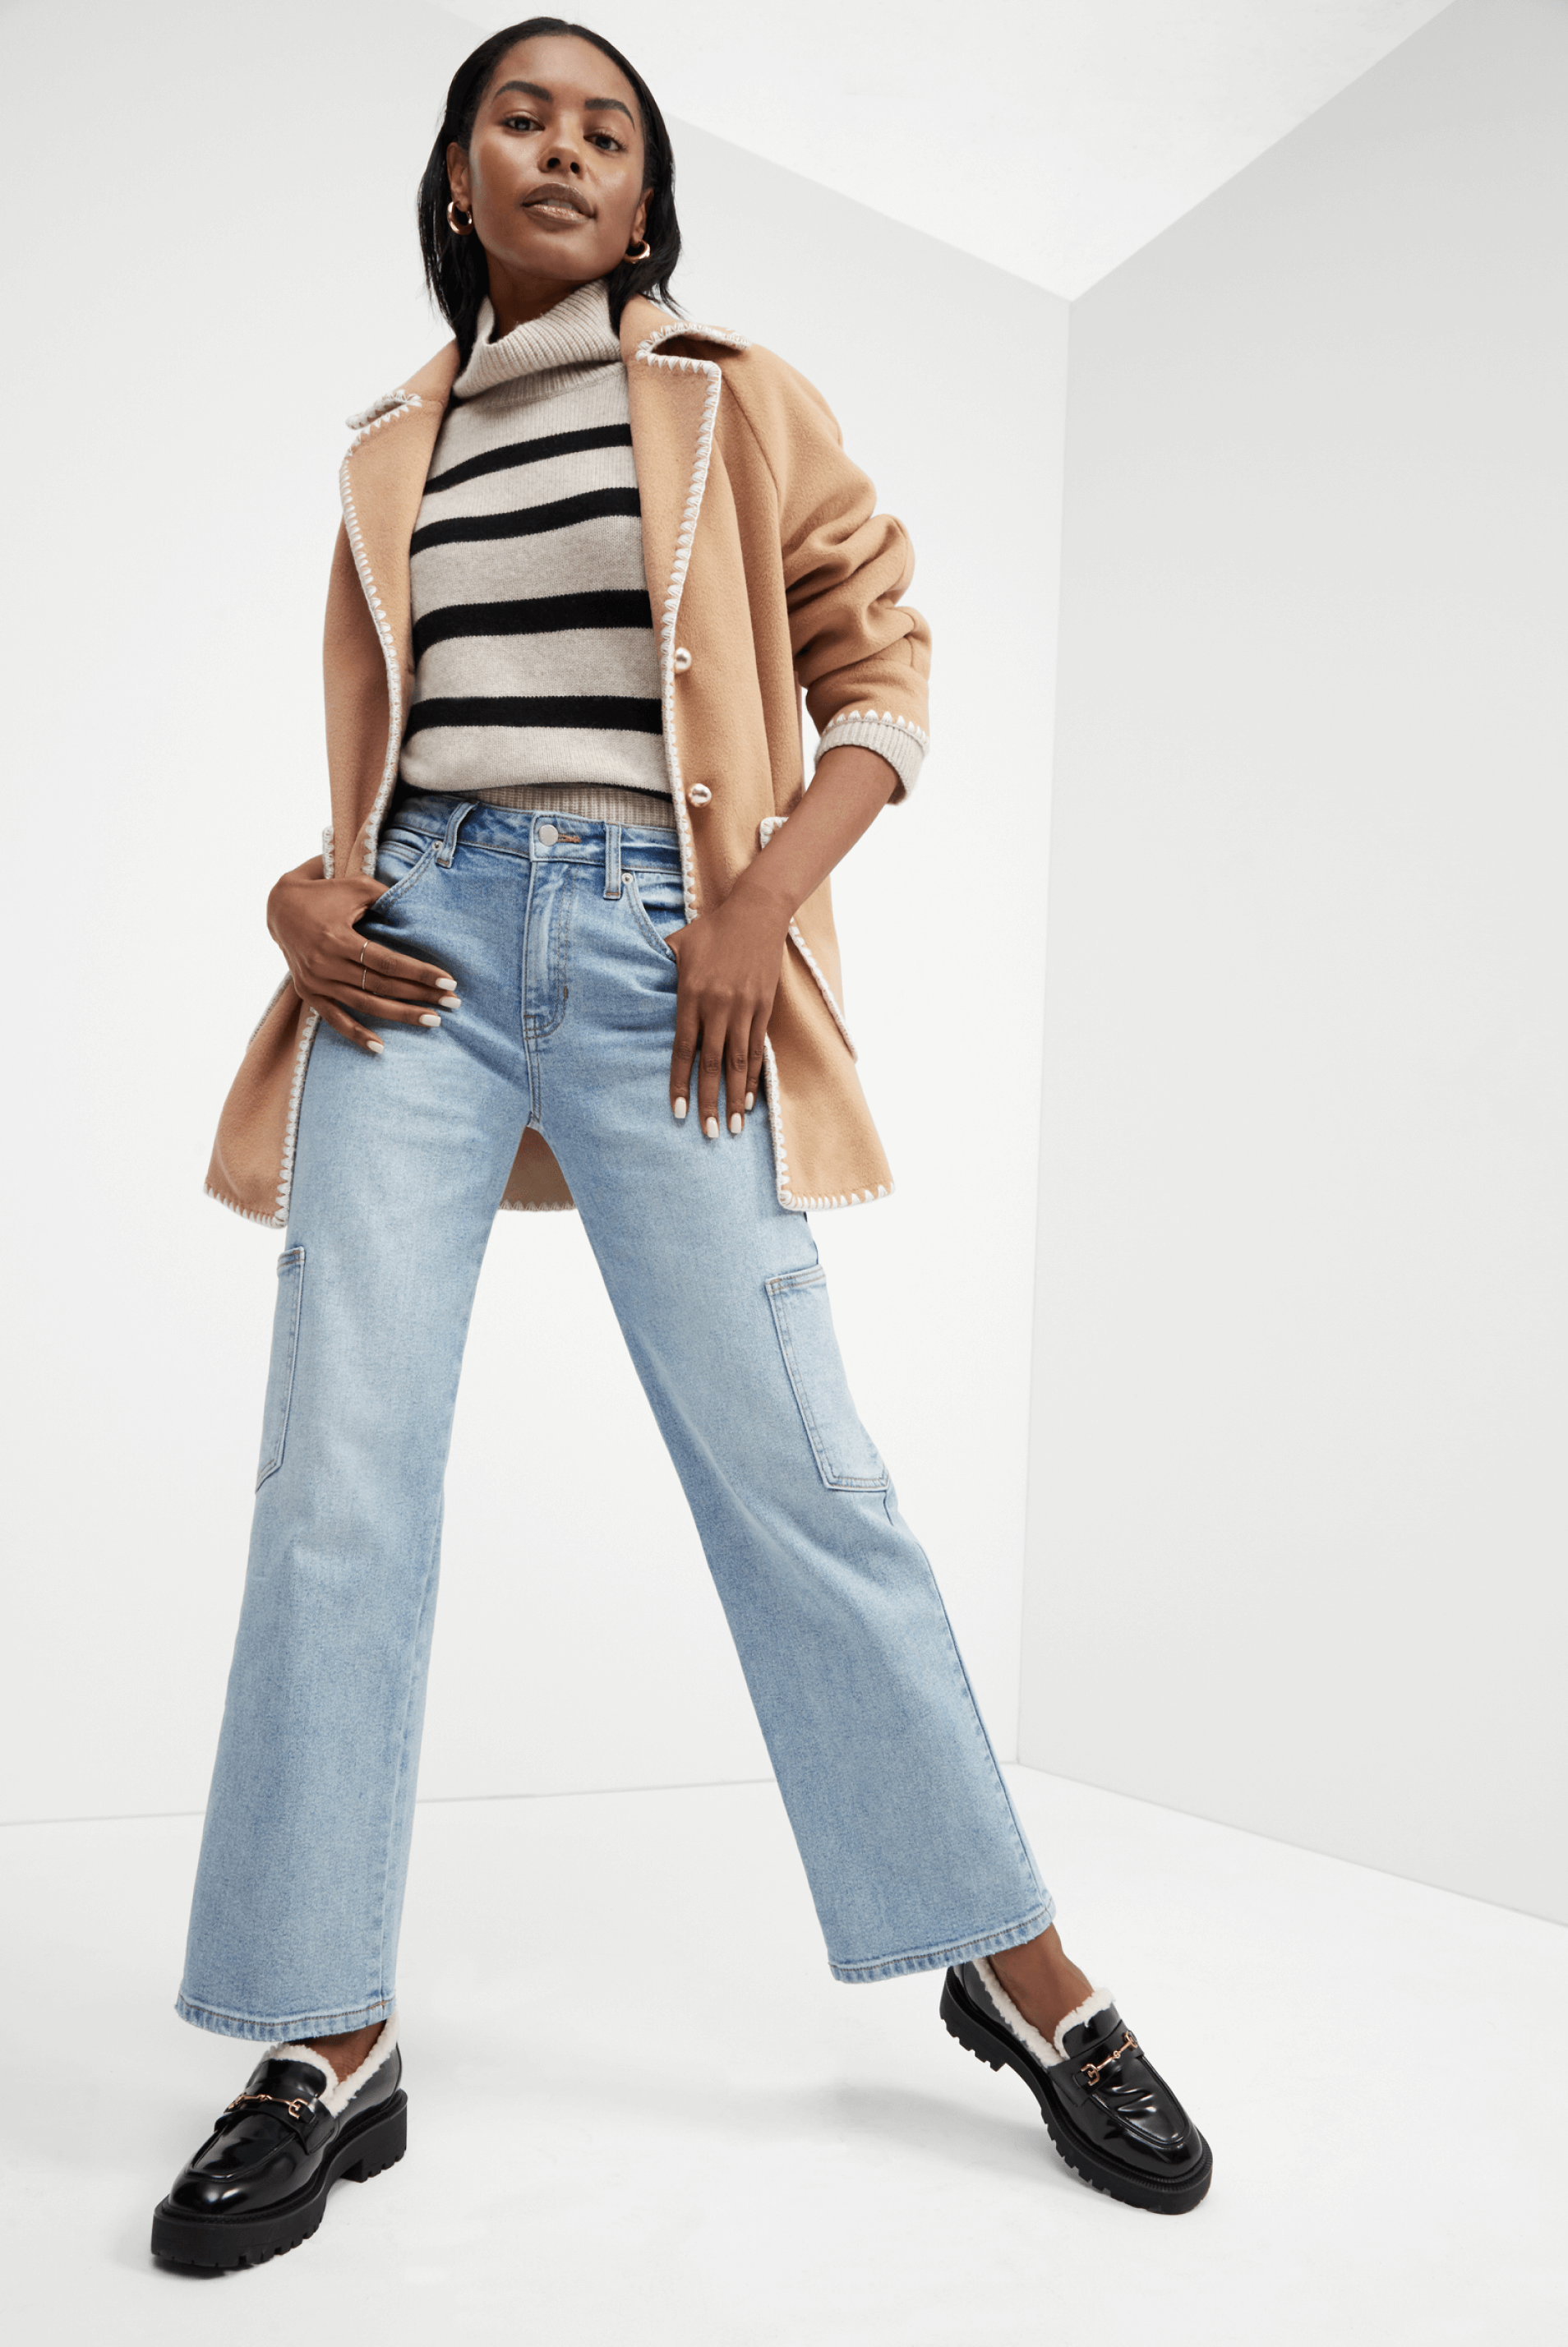 women's fall outfit with utility jeans